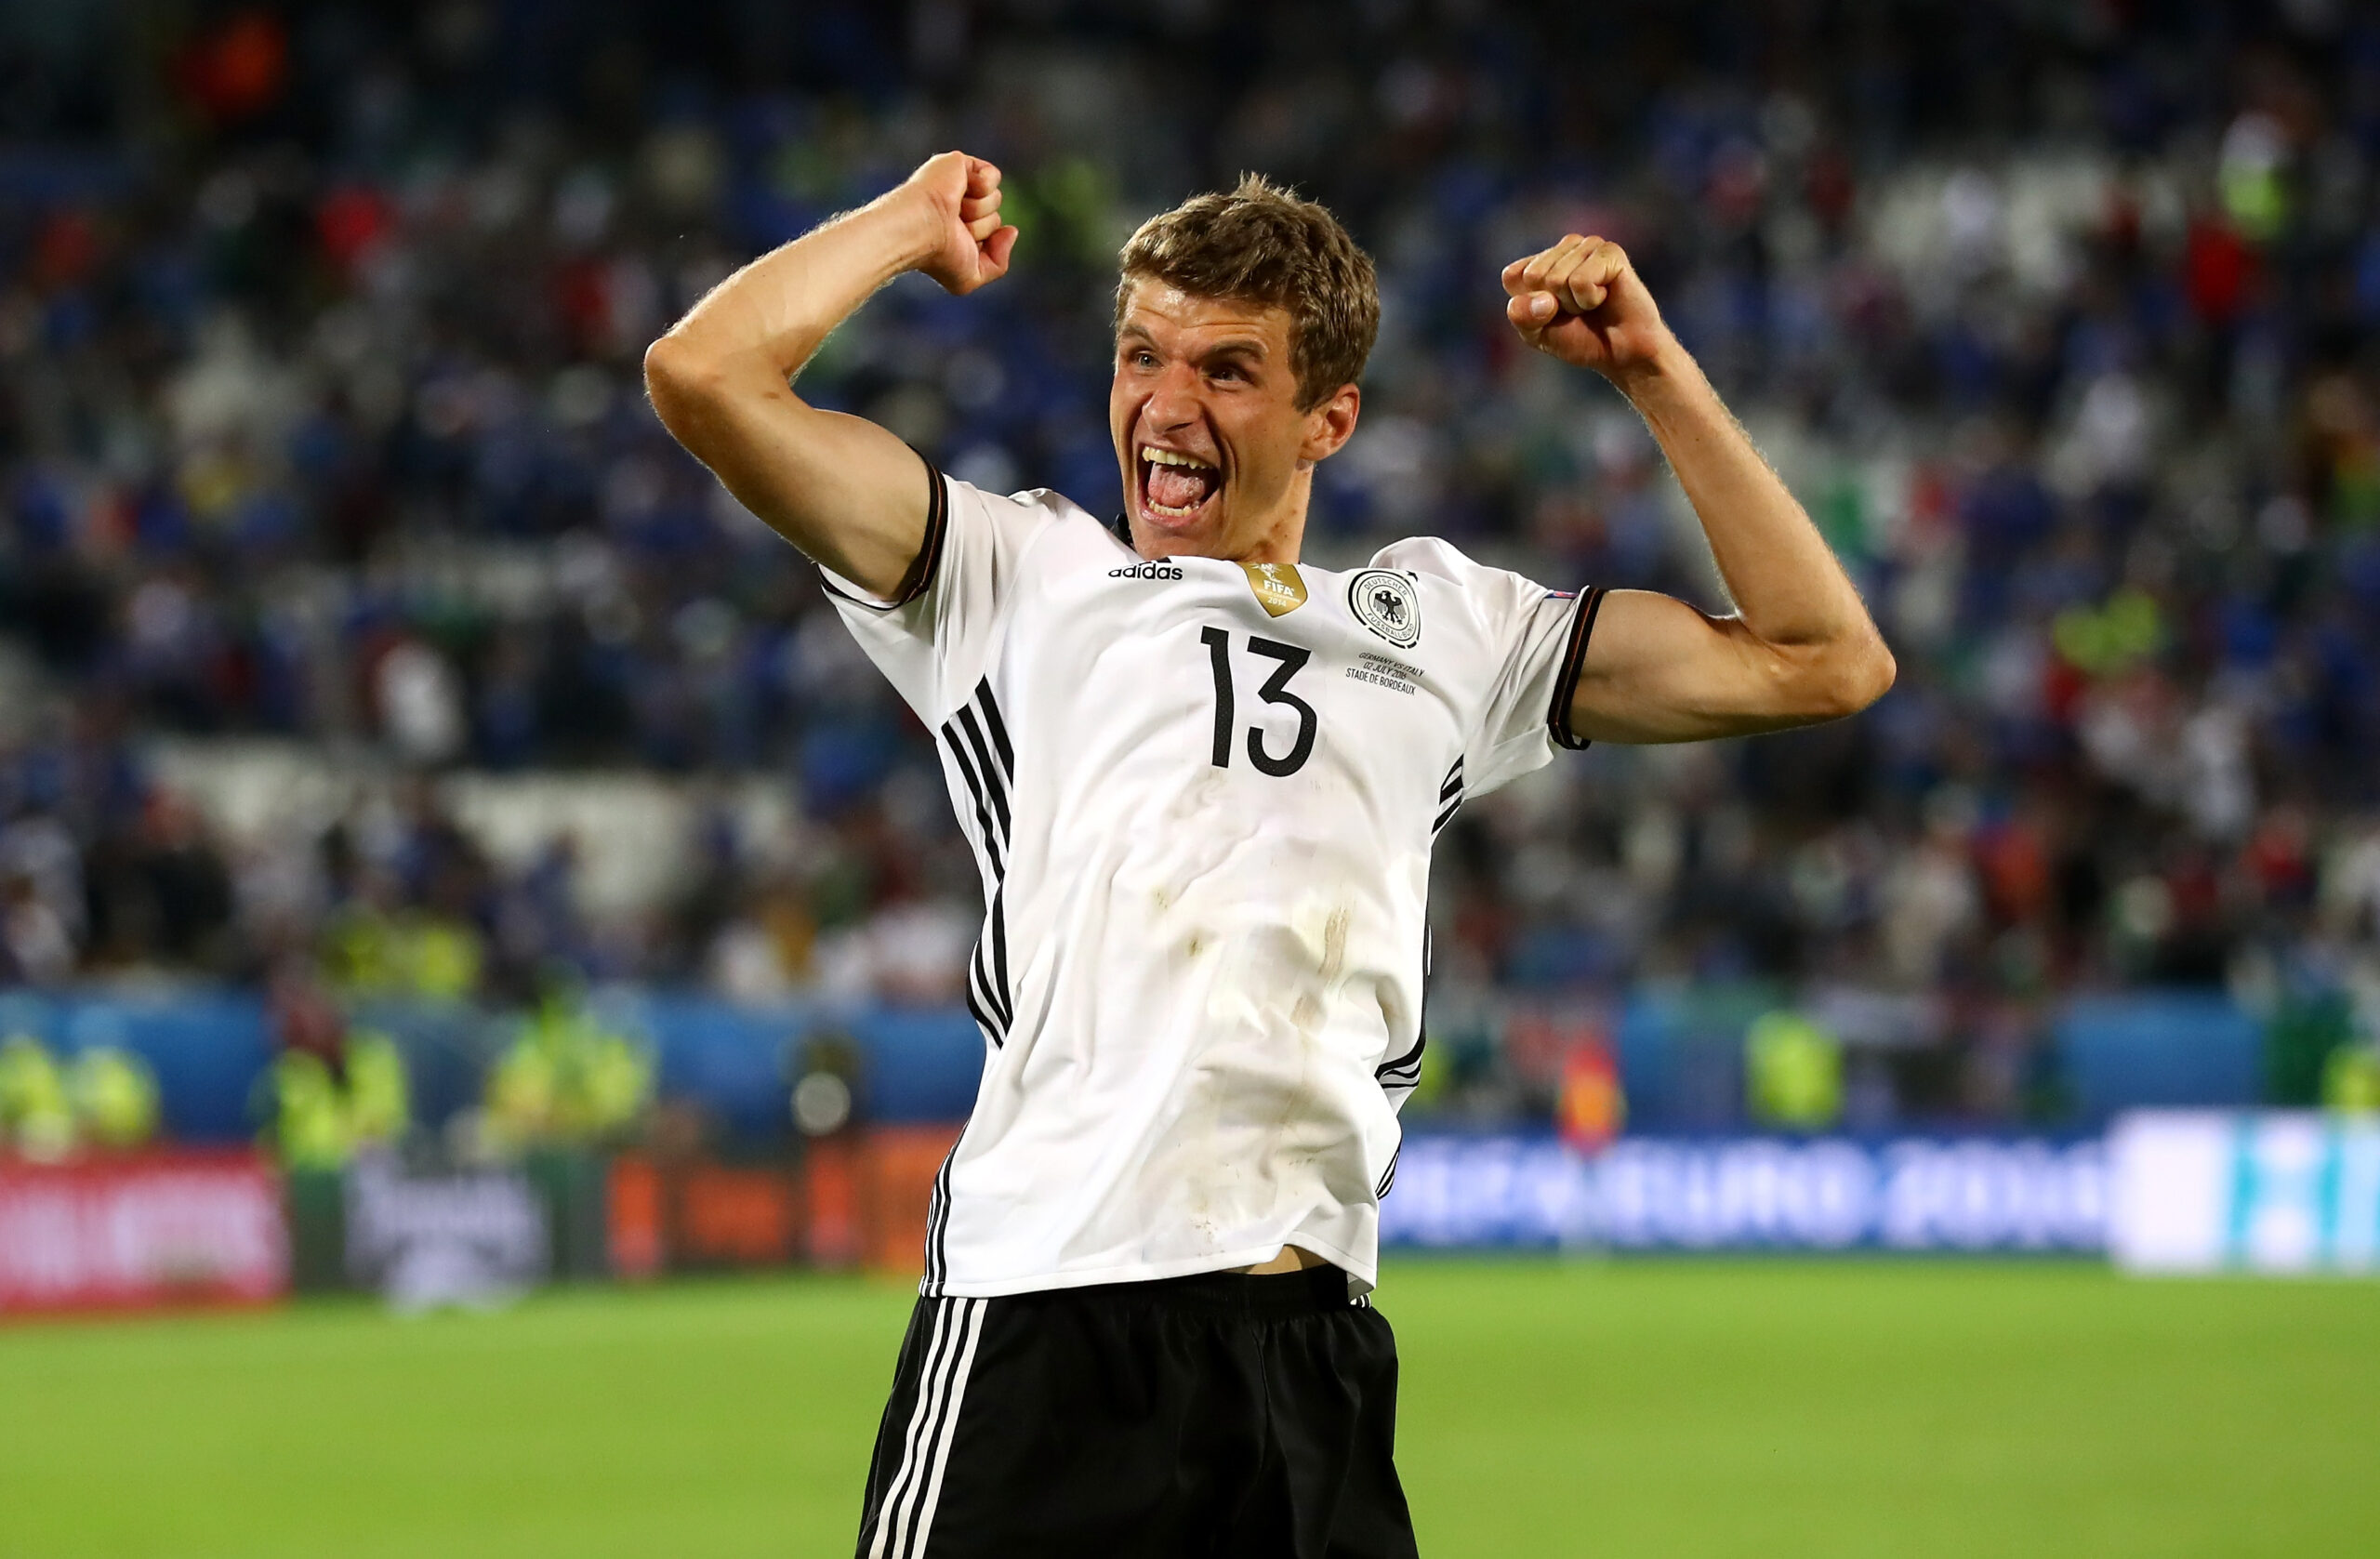 BORDEAUX, FRANCE - JULY 02: Thomas Mueller of Germany celebrates his team's win through the penalty shootout during the UEFA EURO 2016 quarter final match between Germany and Italy at Stade Matmut Atlantique on July 2, 2016 in Bordeaux, France. (Photo by Alexander Hassenstein/Getty Images)